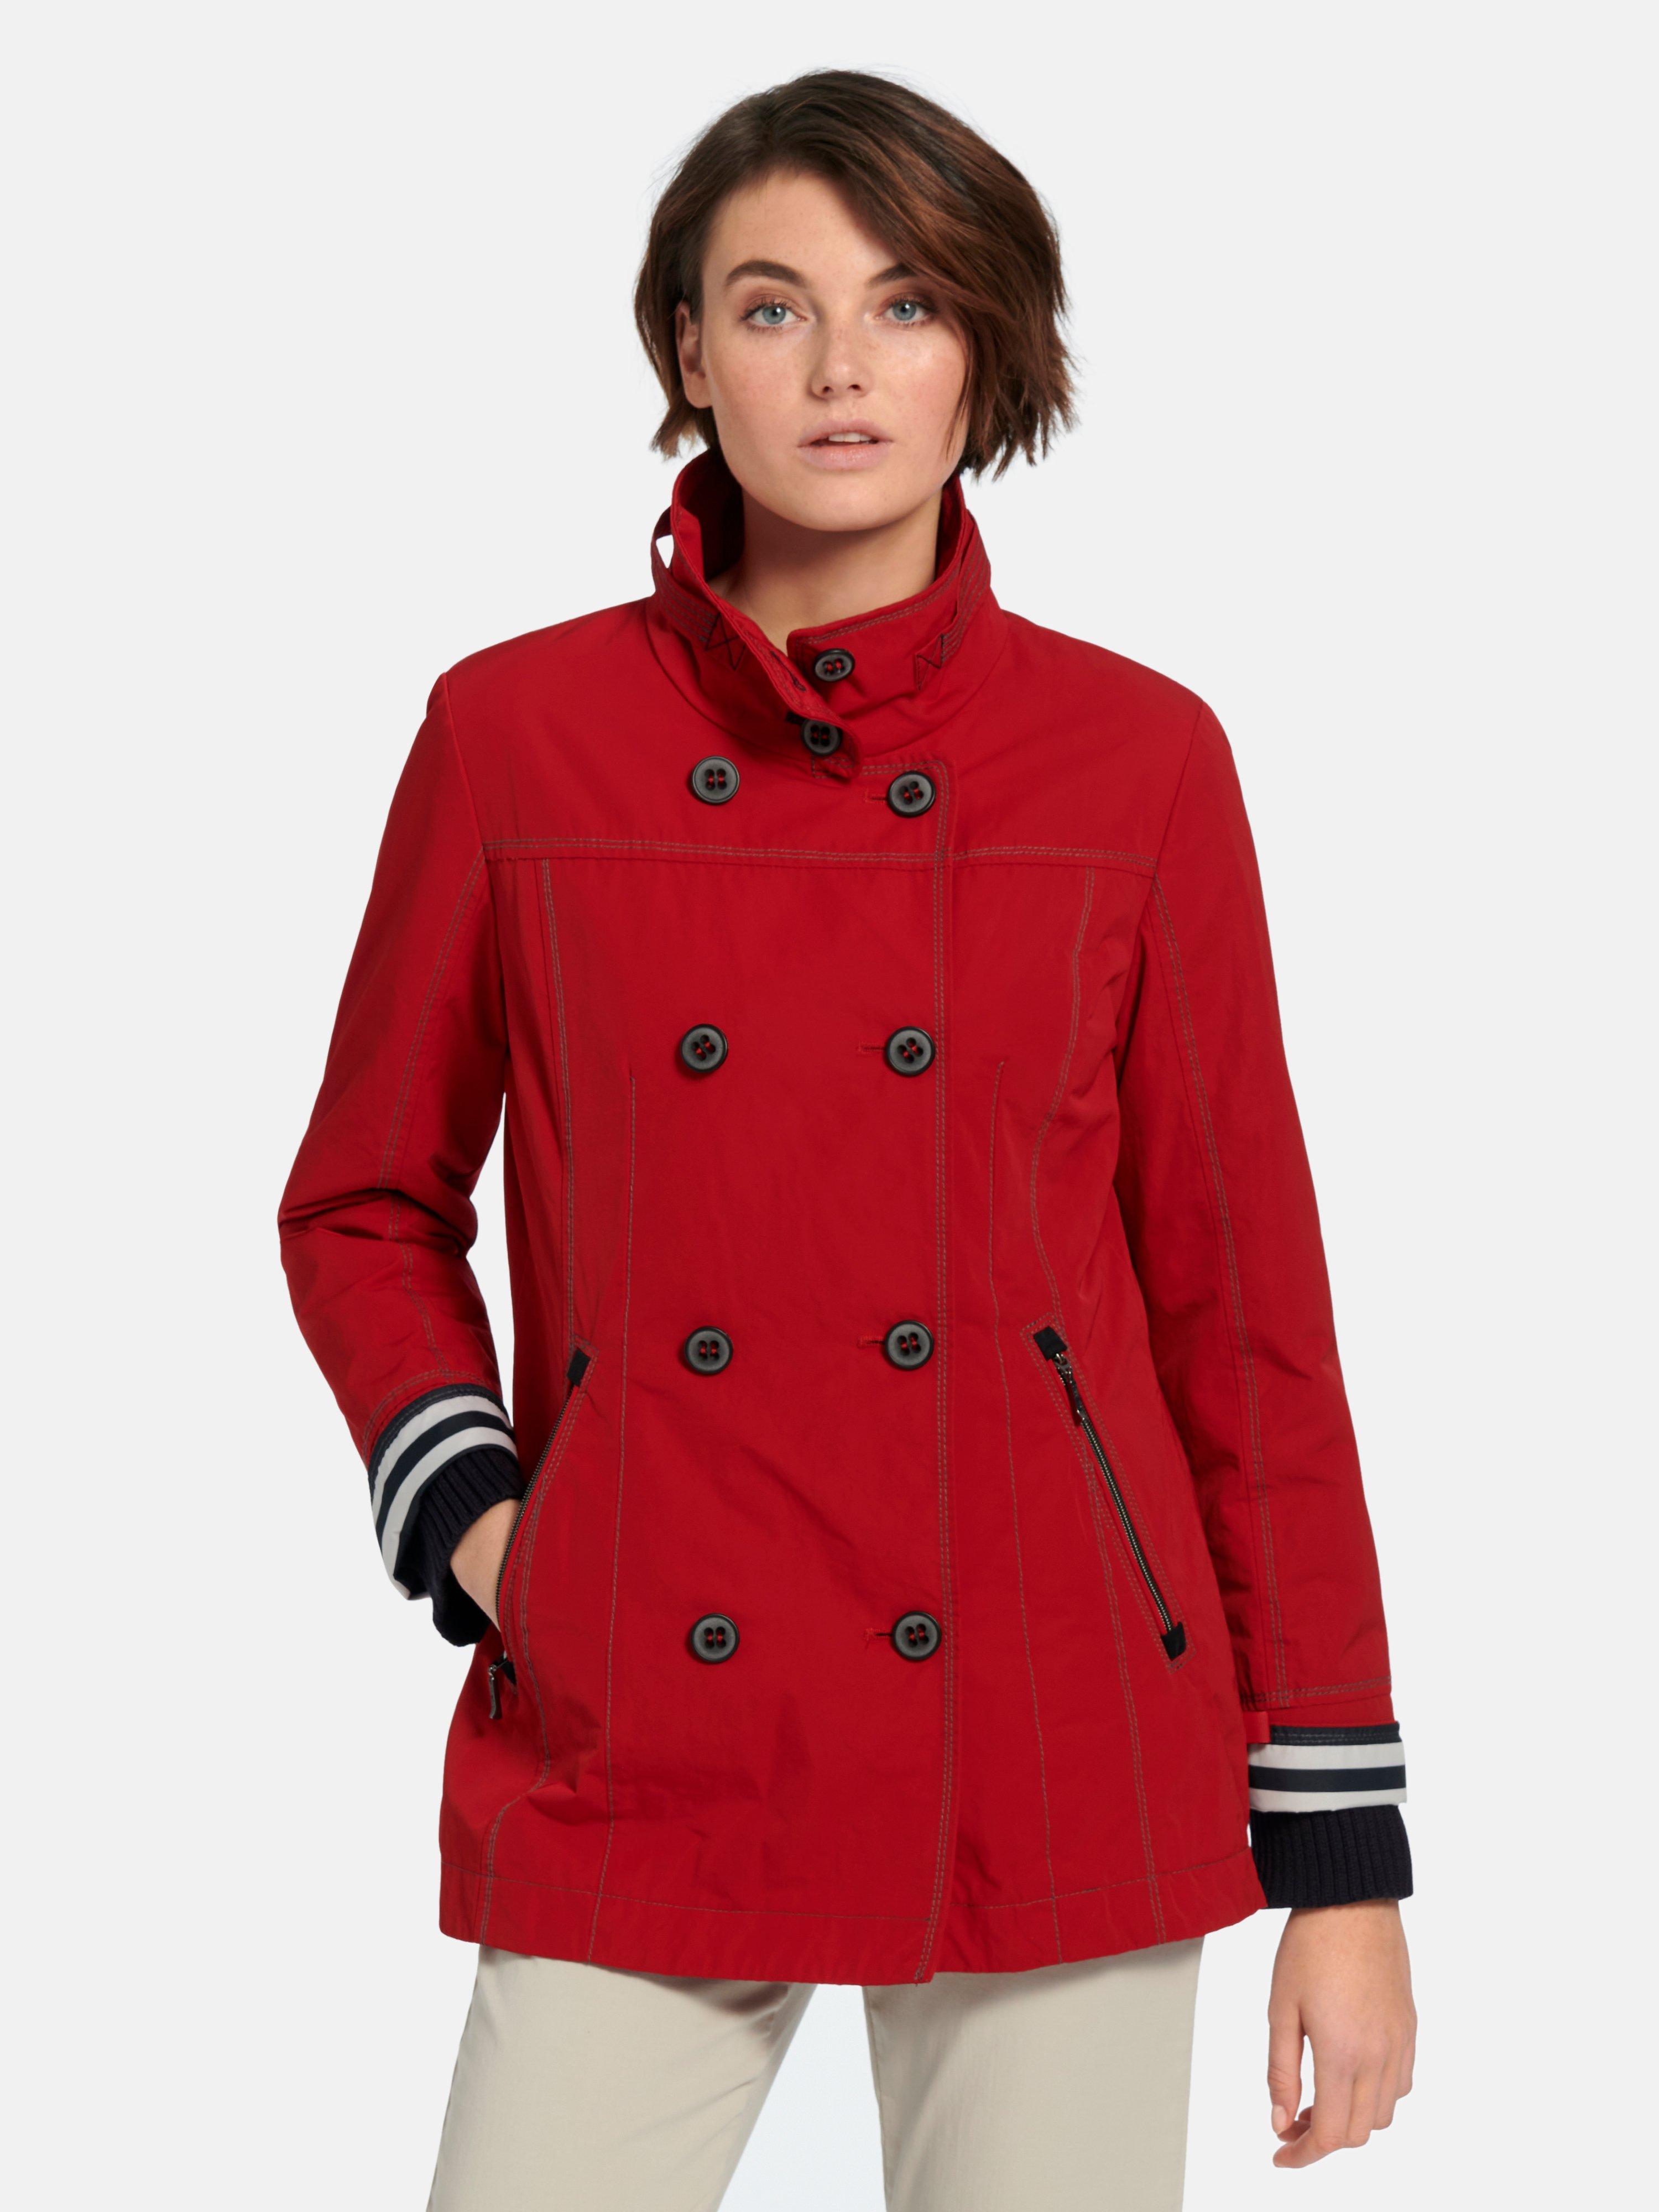 Bret style coat - - caban Double-breasted red Gil